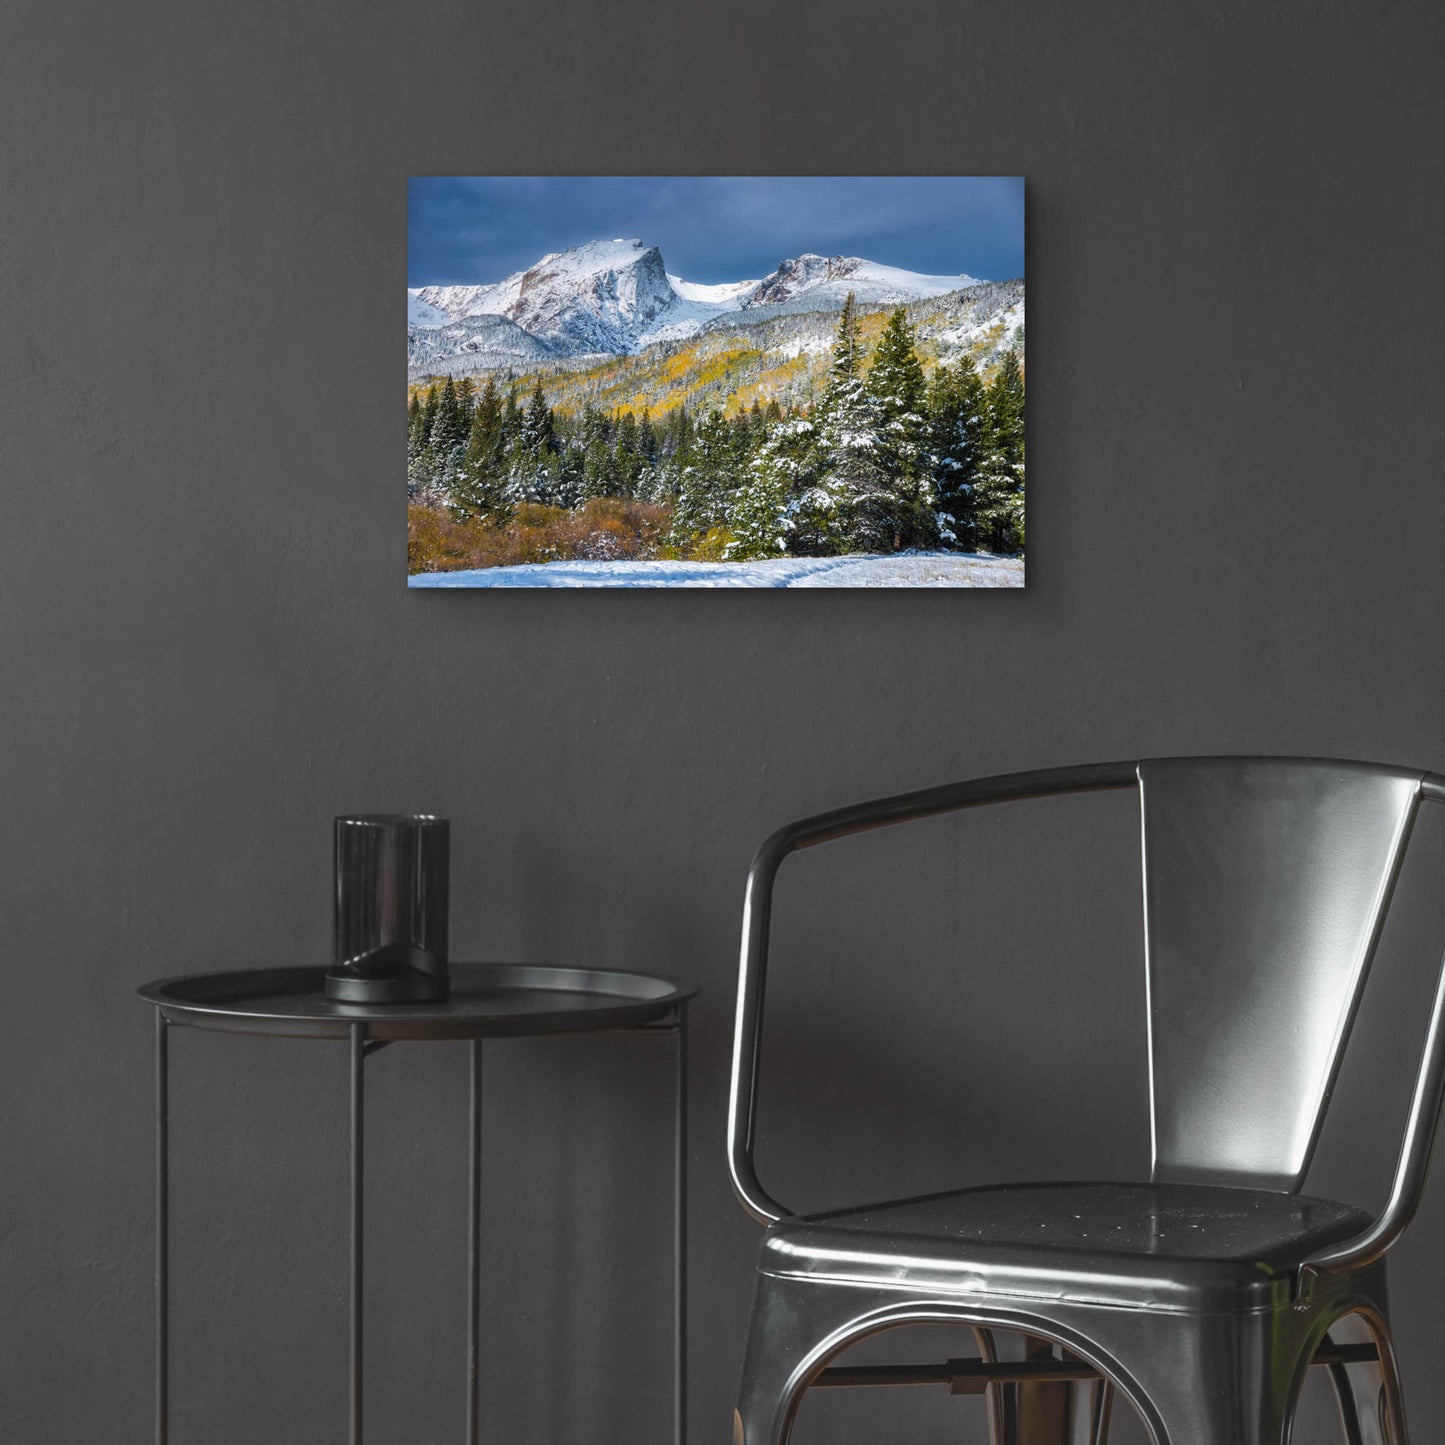 Epic Art 'Christmas In the Rockies - Rocky Mountain National Park' by Darren White, Acrylic Glass Wall Art,24x16